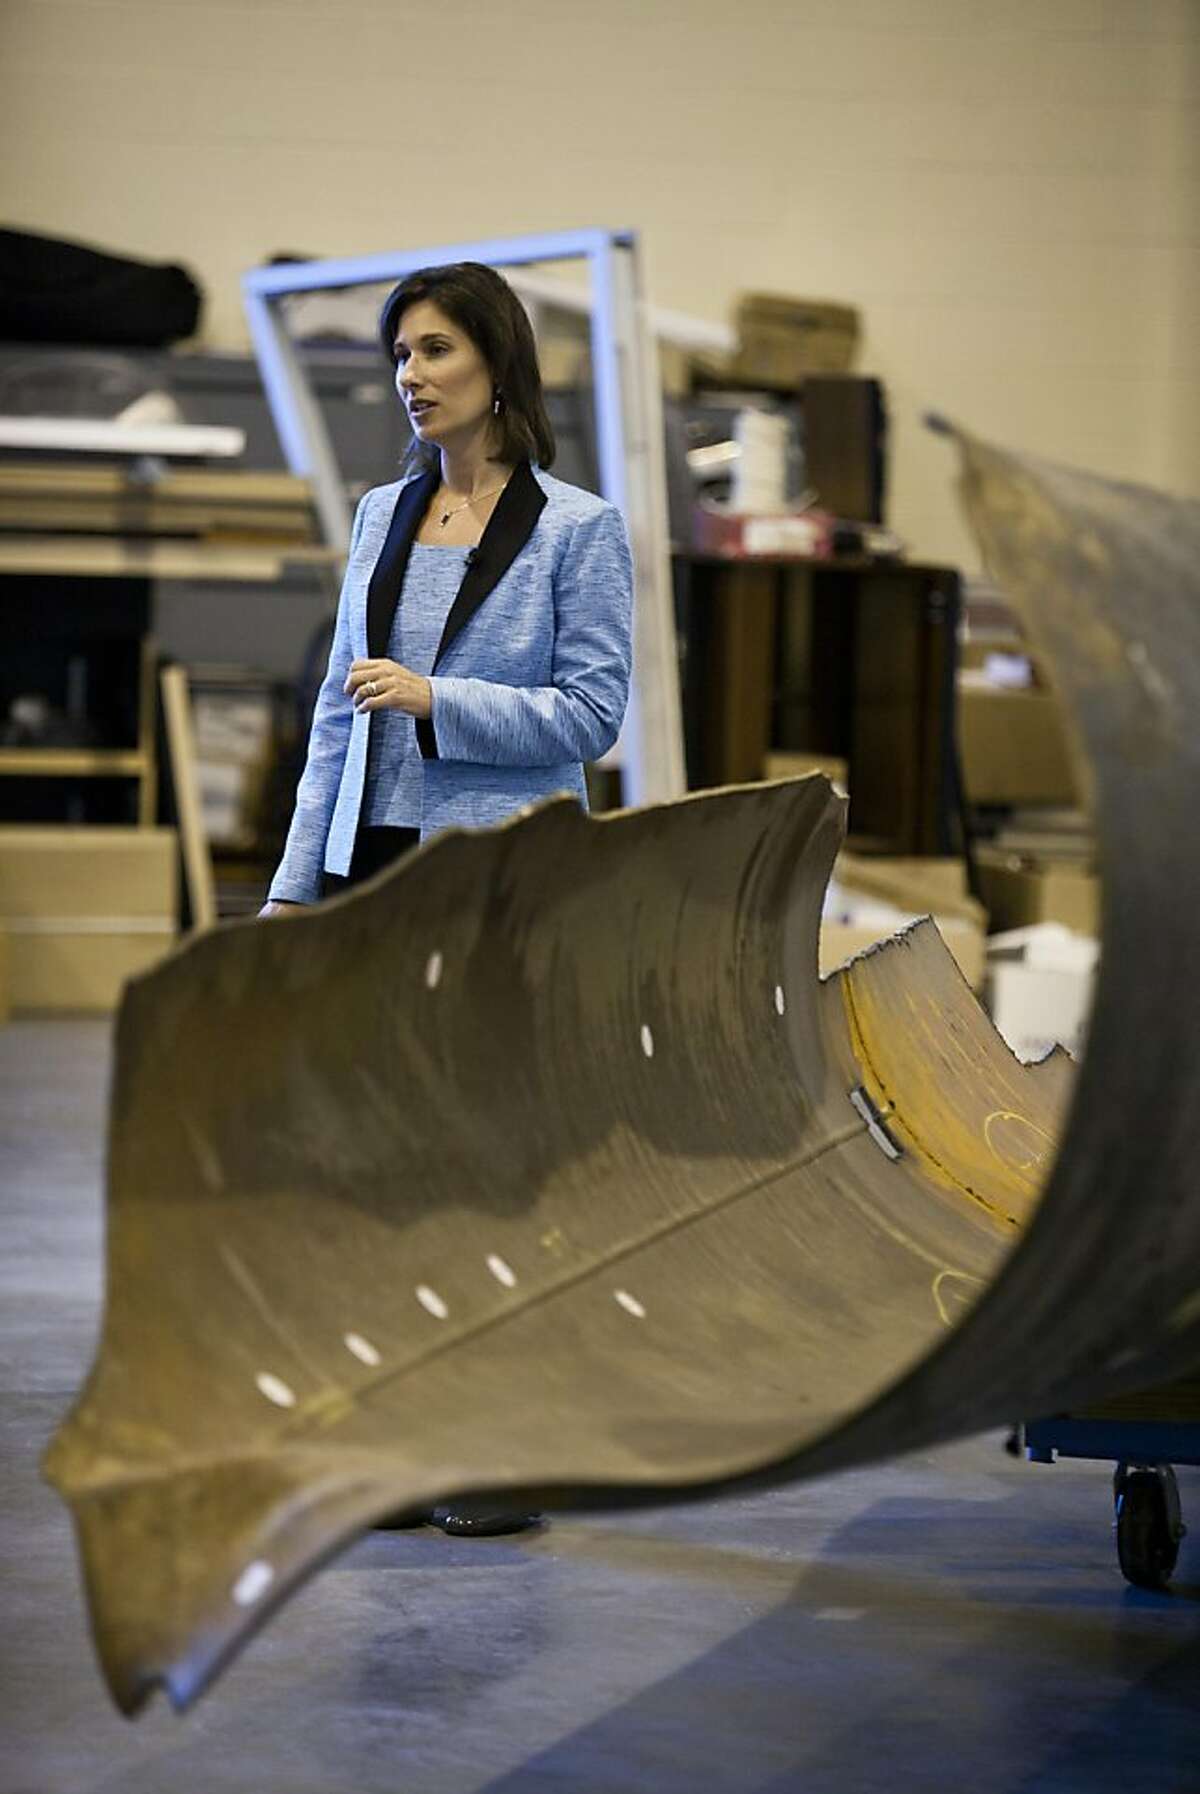 Debbie Hersman, Chairman of the National Transportation Safety Board, discusses the agency's investigation of the San Bruno gas pipleline explosion, the key piece of which she is standing next to, at the NTSB's training center and lab in Ashburn, Va., on Monday, August 29, 2011. The NTSB will hold a meeting to discuss the findings and probable cause of the accident tomorrow.